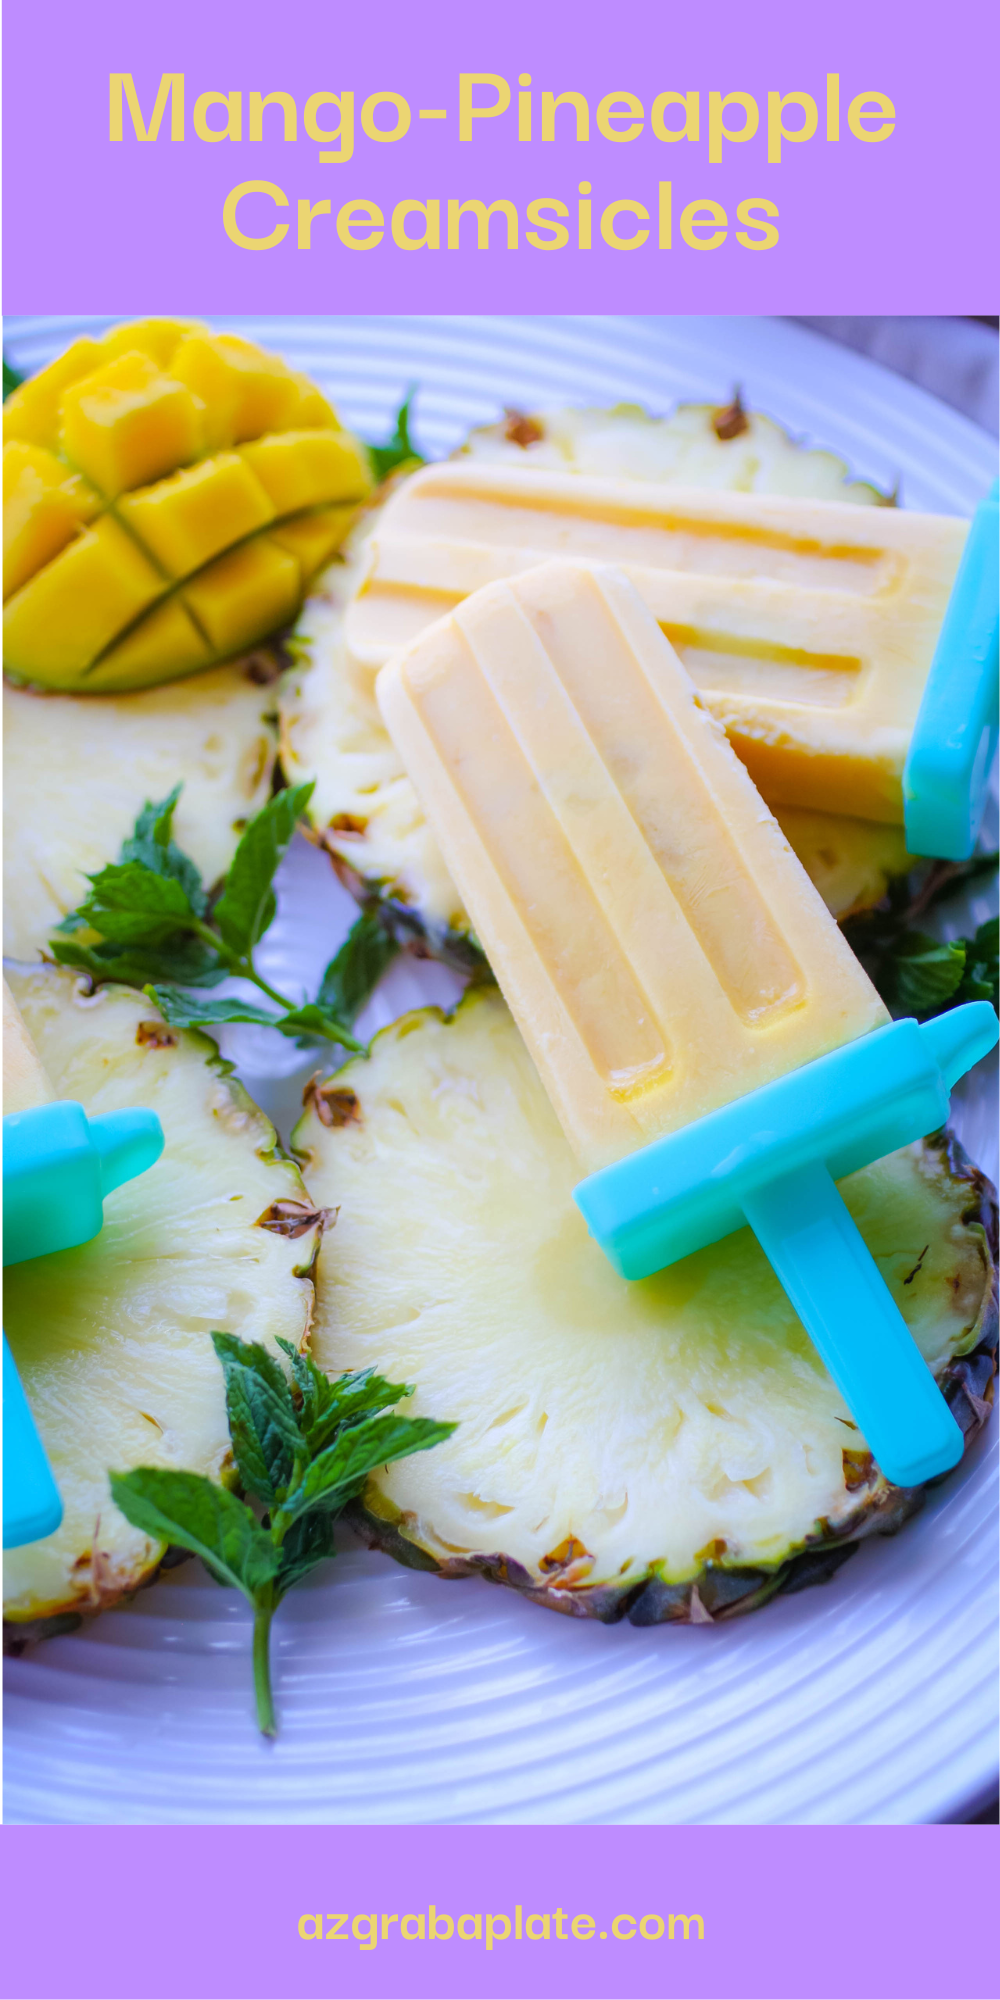 Mango-Pineapple Creamsicles are fun and flavorful to beat the heat with a frozen treat.